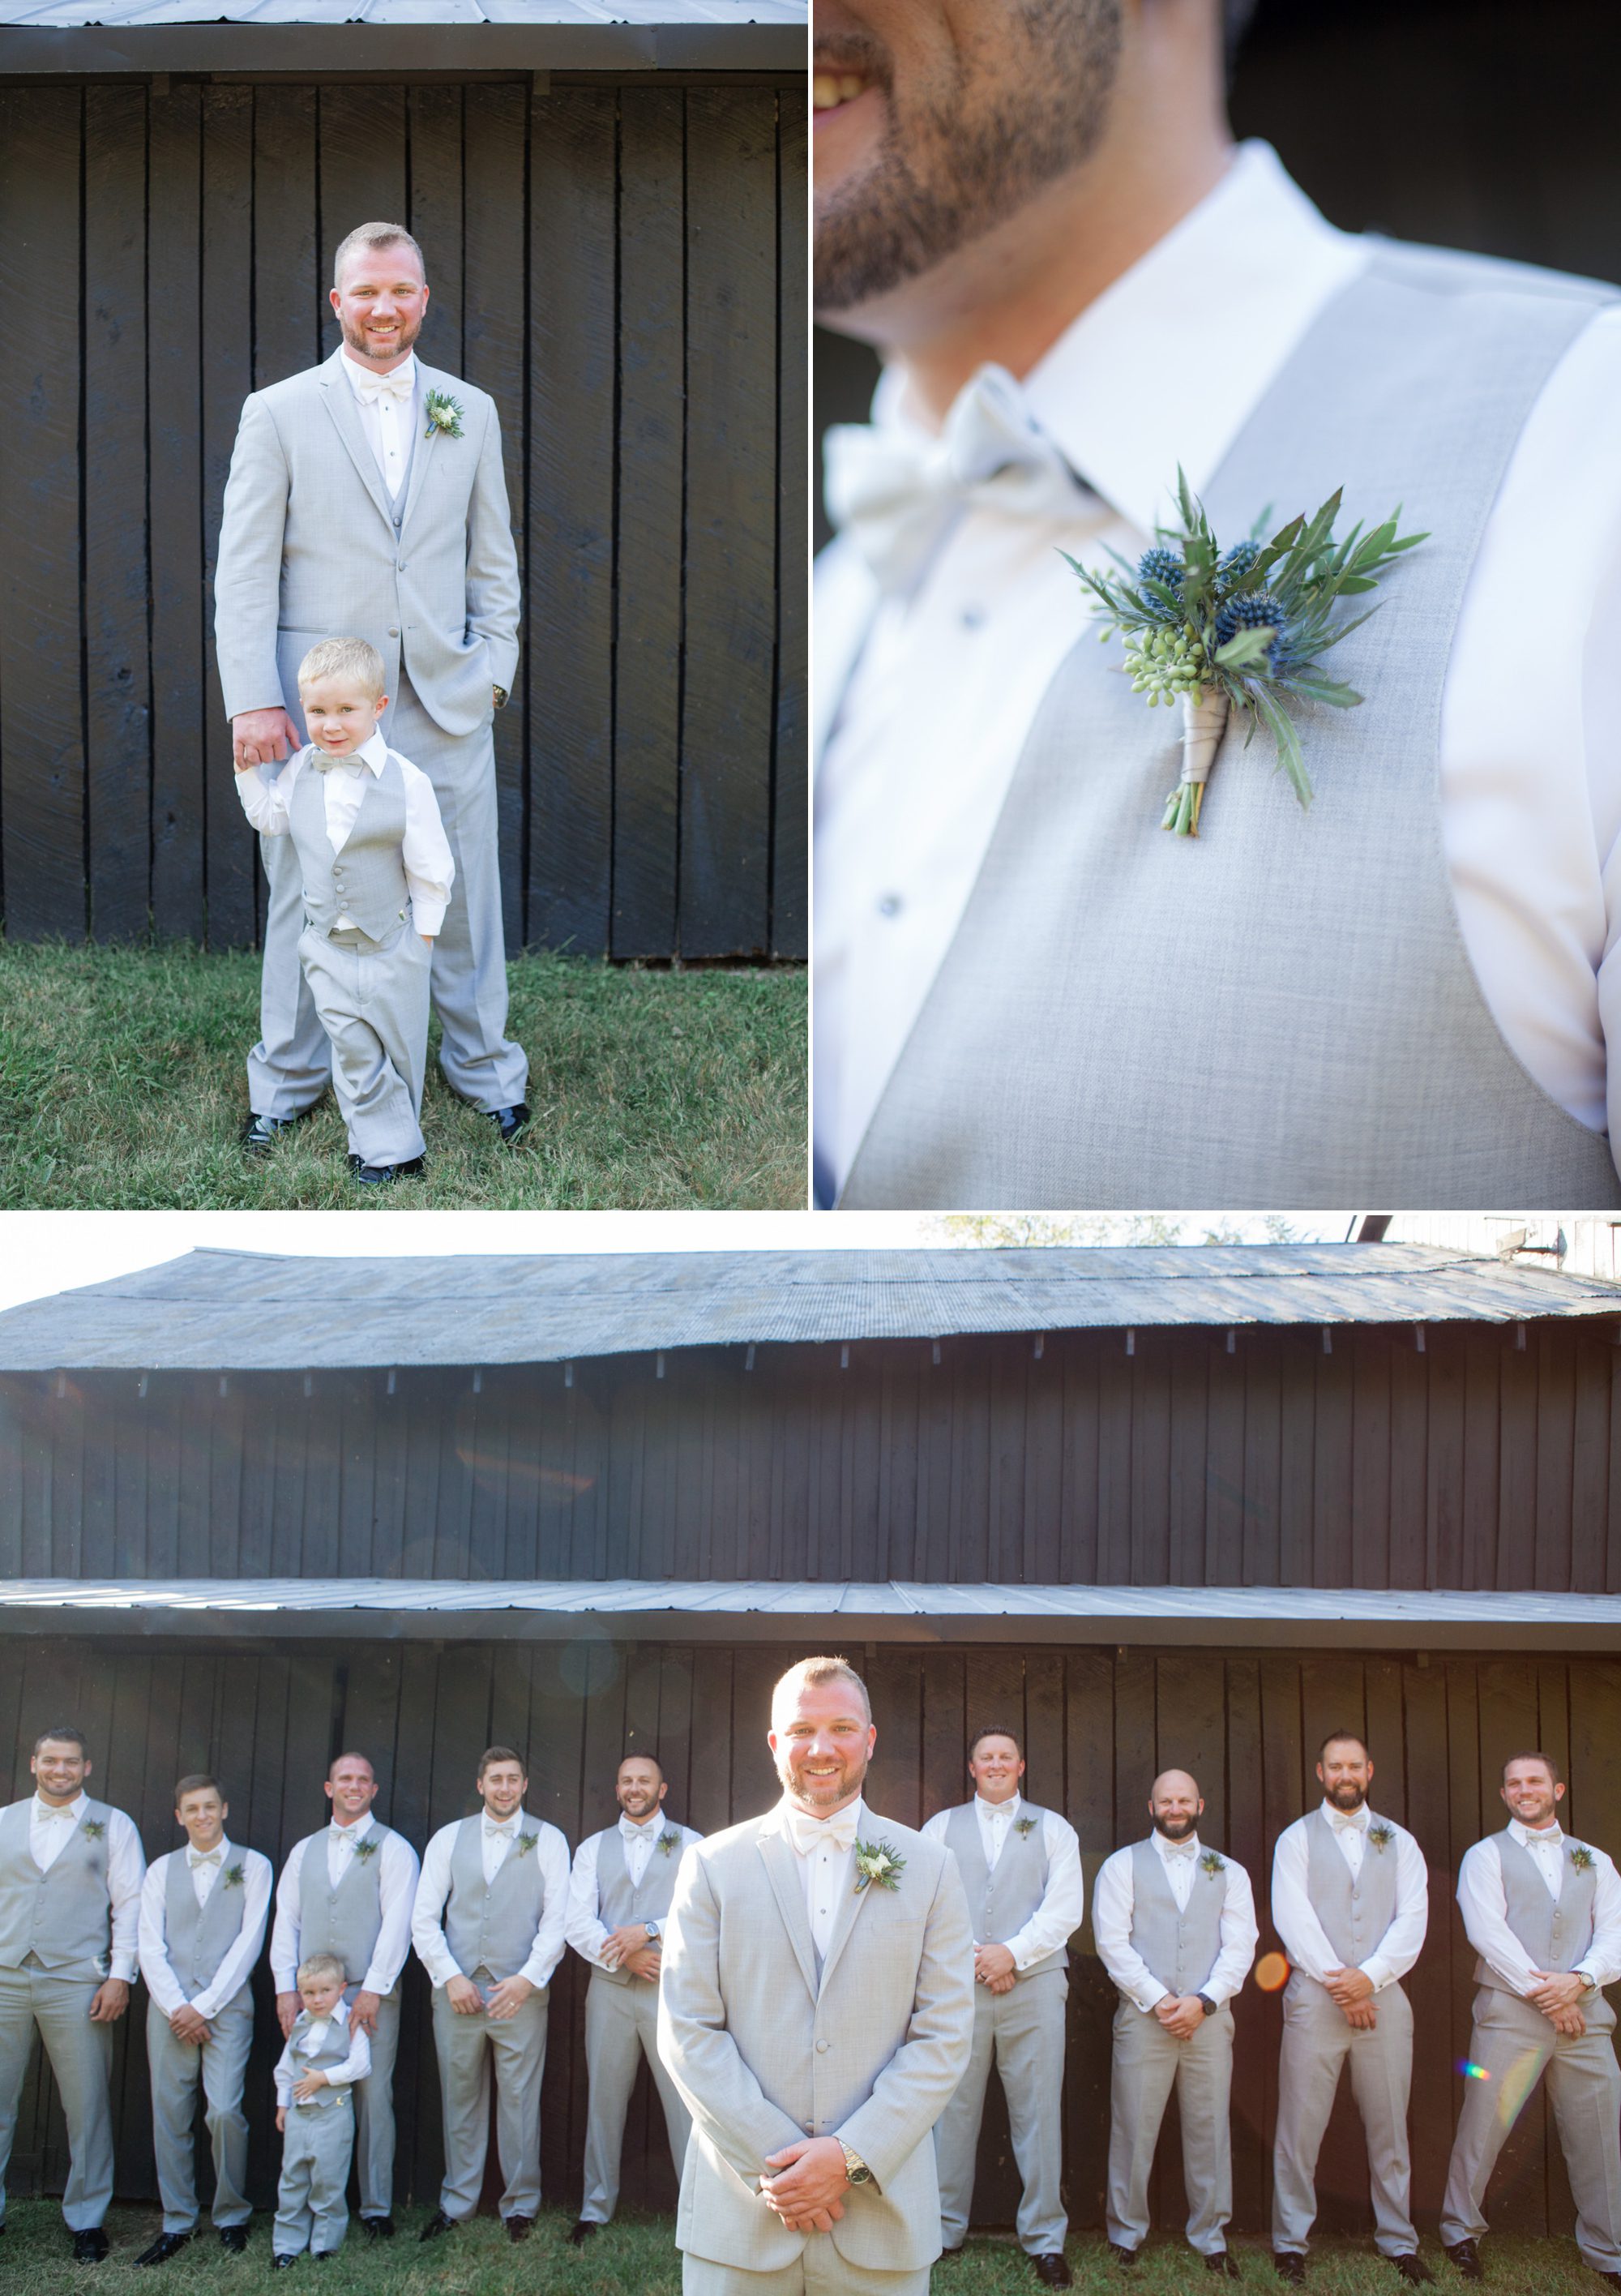 Photo of groom and groomsmen before wedding ceremony. Wedding photography at Cedarwood Weddings and Estate in Nashville, TN photography by Krista Lee Photography